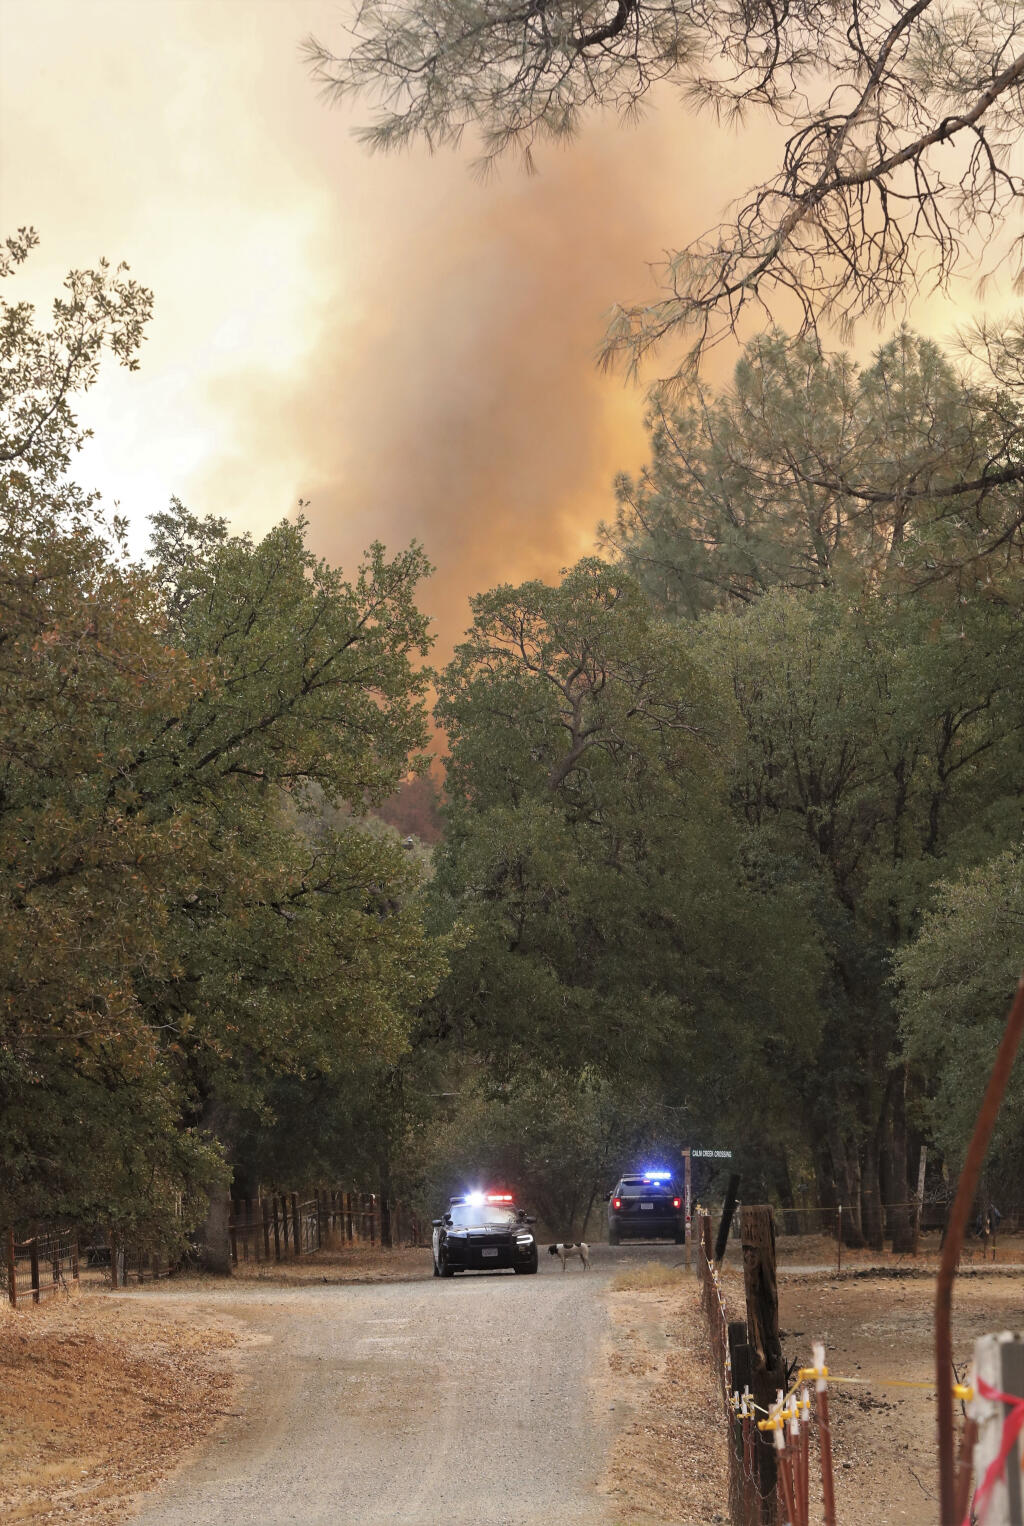 Shasta County sheriff's deputies check on an evacuated neighborhood along Casa Drive as the Fawn fire burns in the background near Redding, Calif., on Thursday, Sept. 23, 2021. (Mike Chapman/The Record Searchlight via AP)